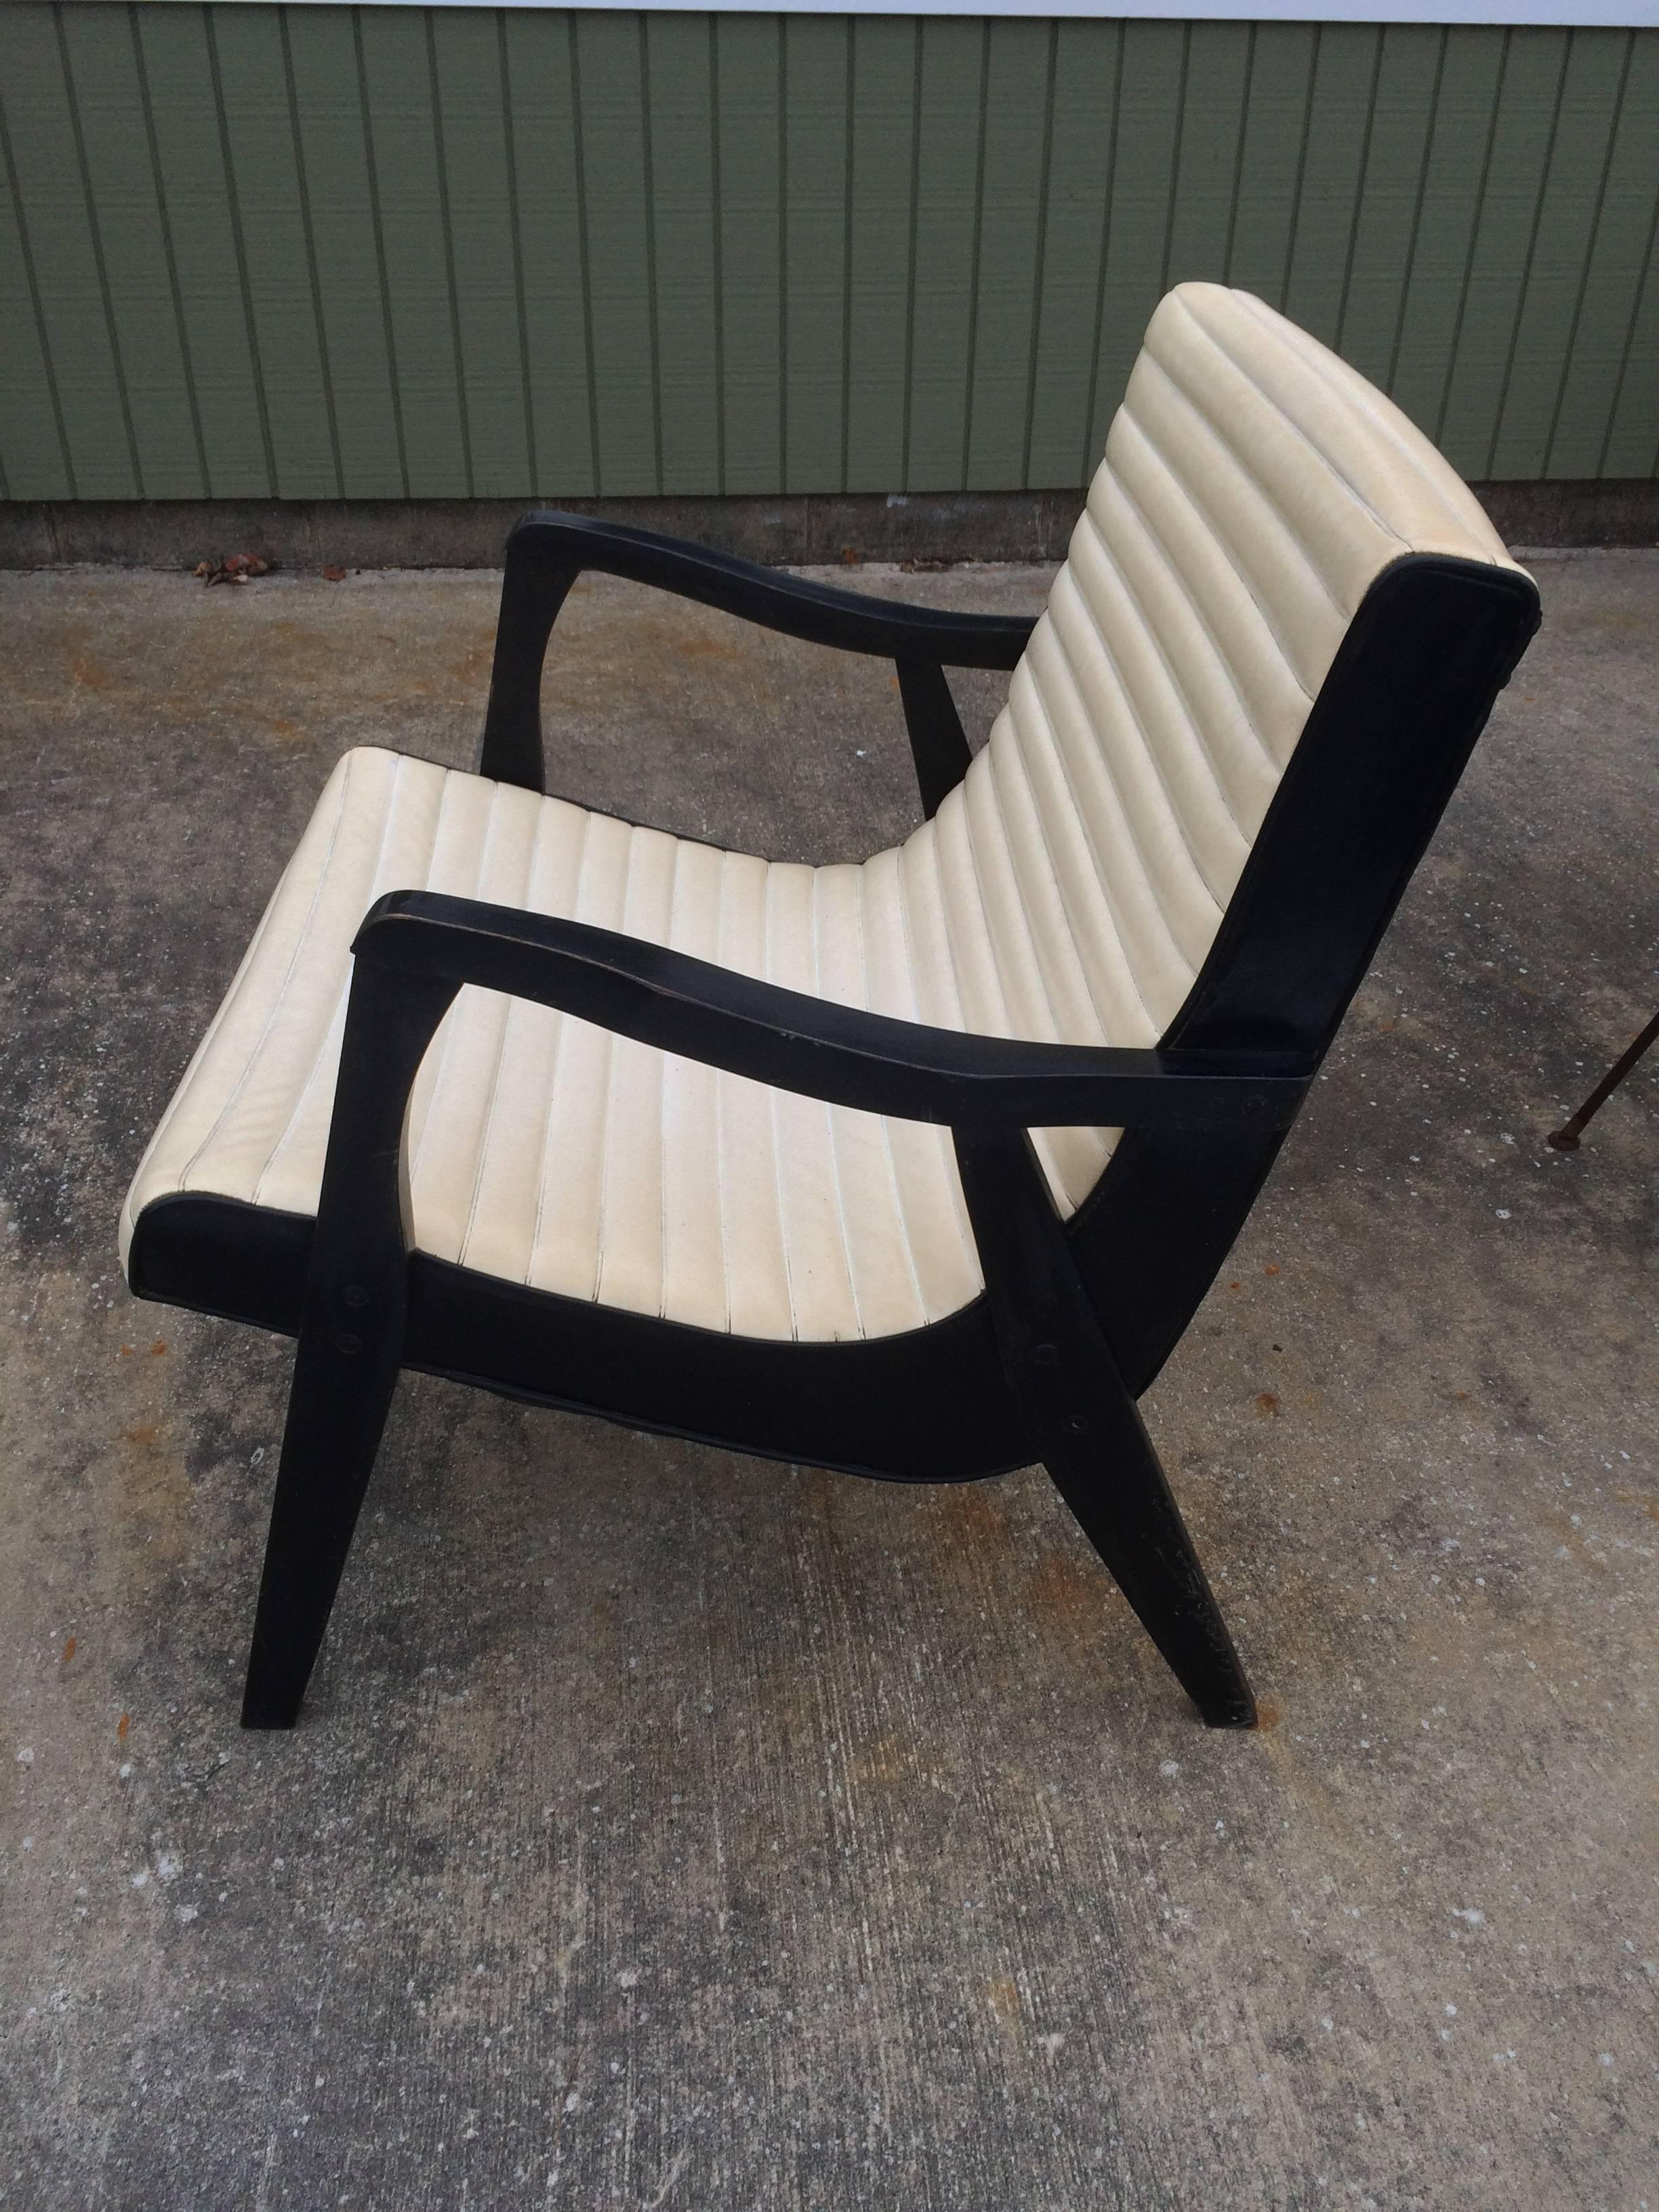 Mid-Century black and ivory vinyl lounge chair. Channel back design with dramatic cream and black color contrast. Epic lines.
DIMENSIONS
H 30 in. x W 26 in. x D 28. Seat height 18.5 in. Seat width is 22.50 in. Seat depth is 18 in.